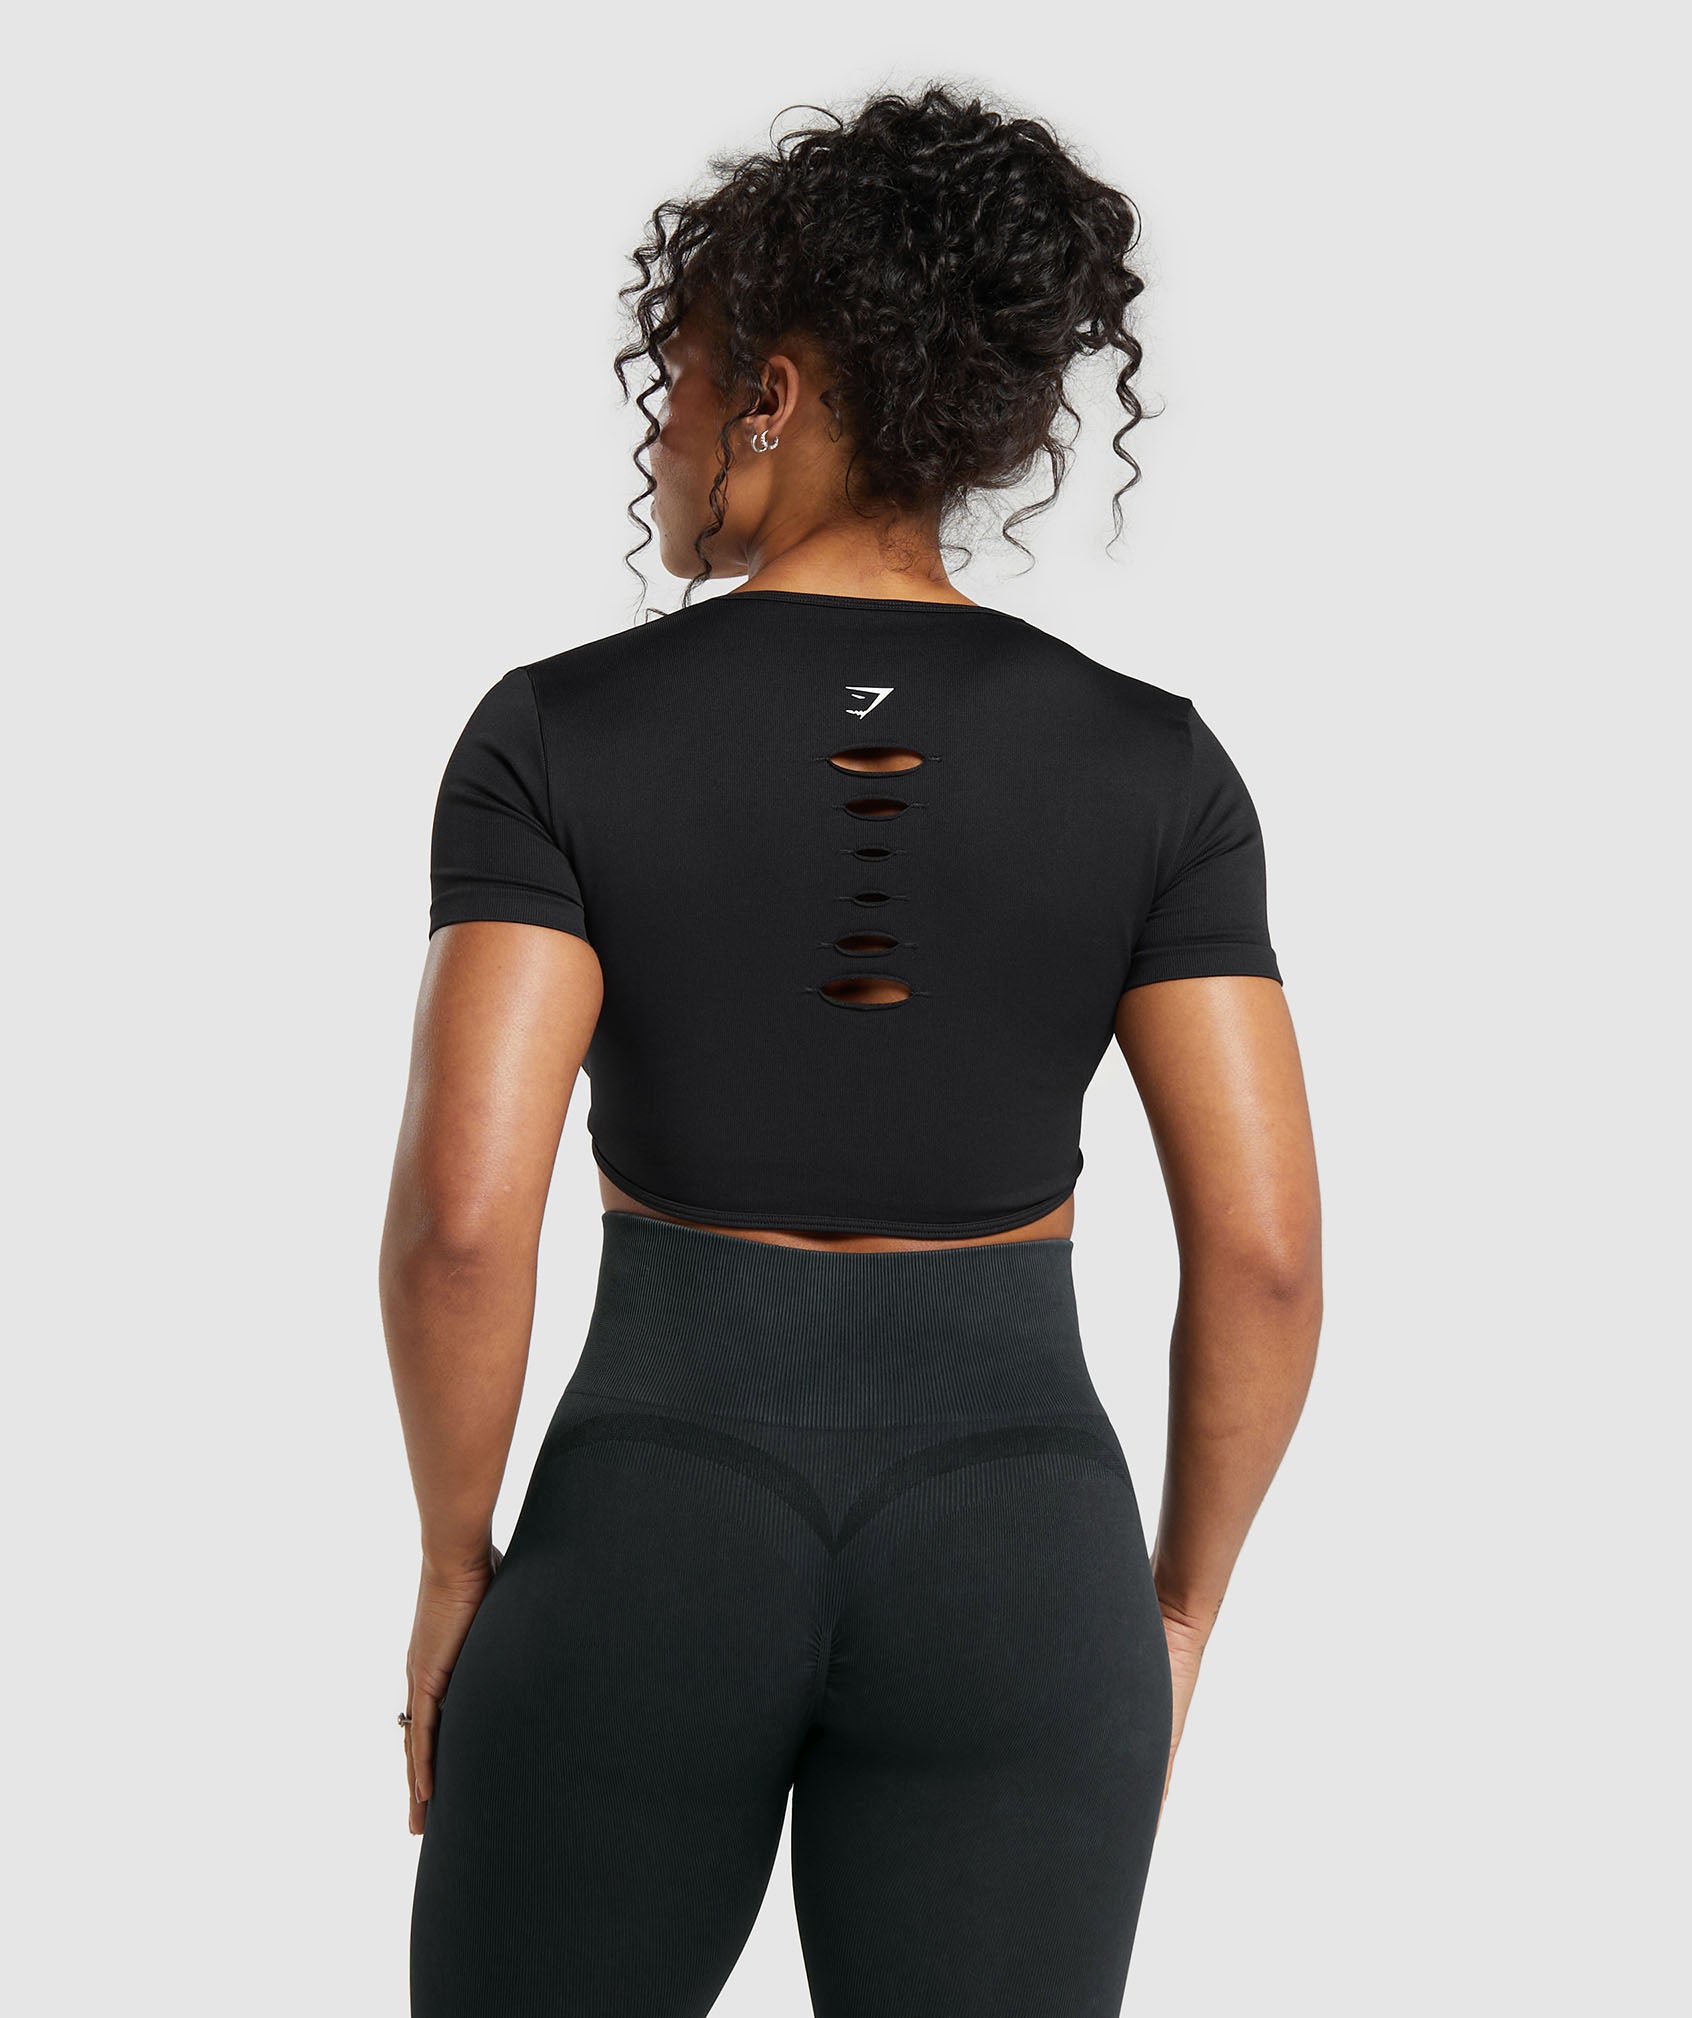 Gains Seamless Fitted Crop Top in Black - view 2